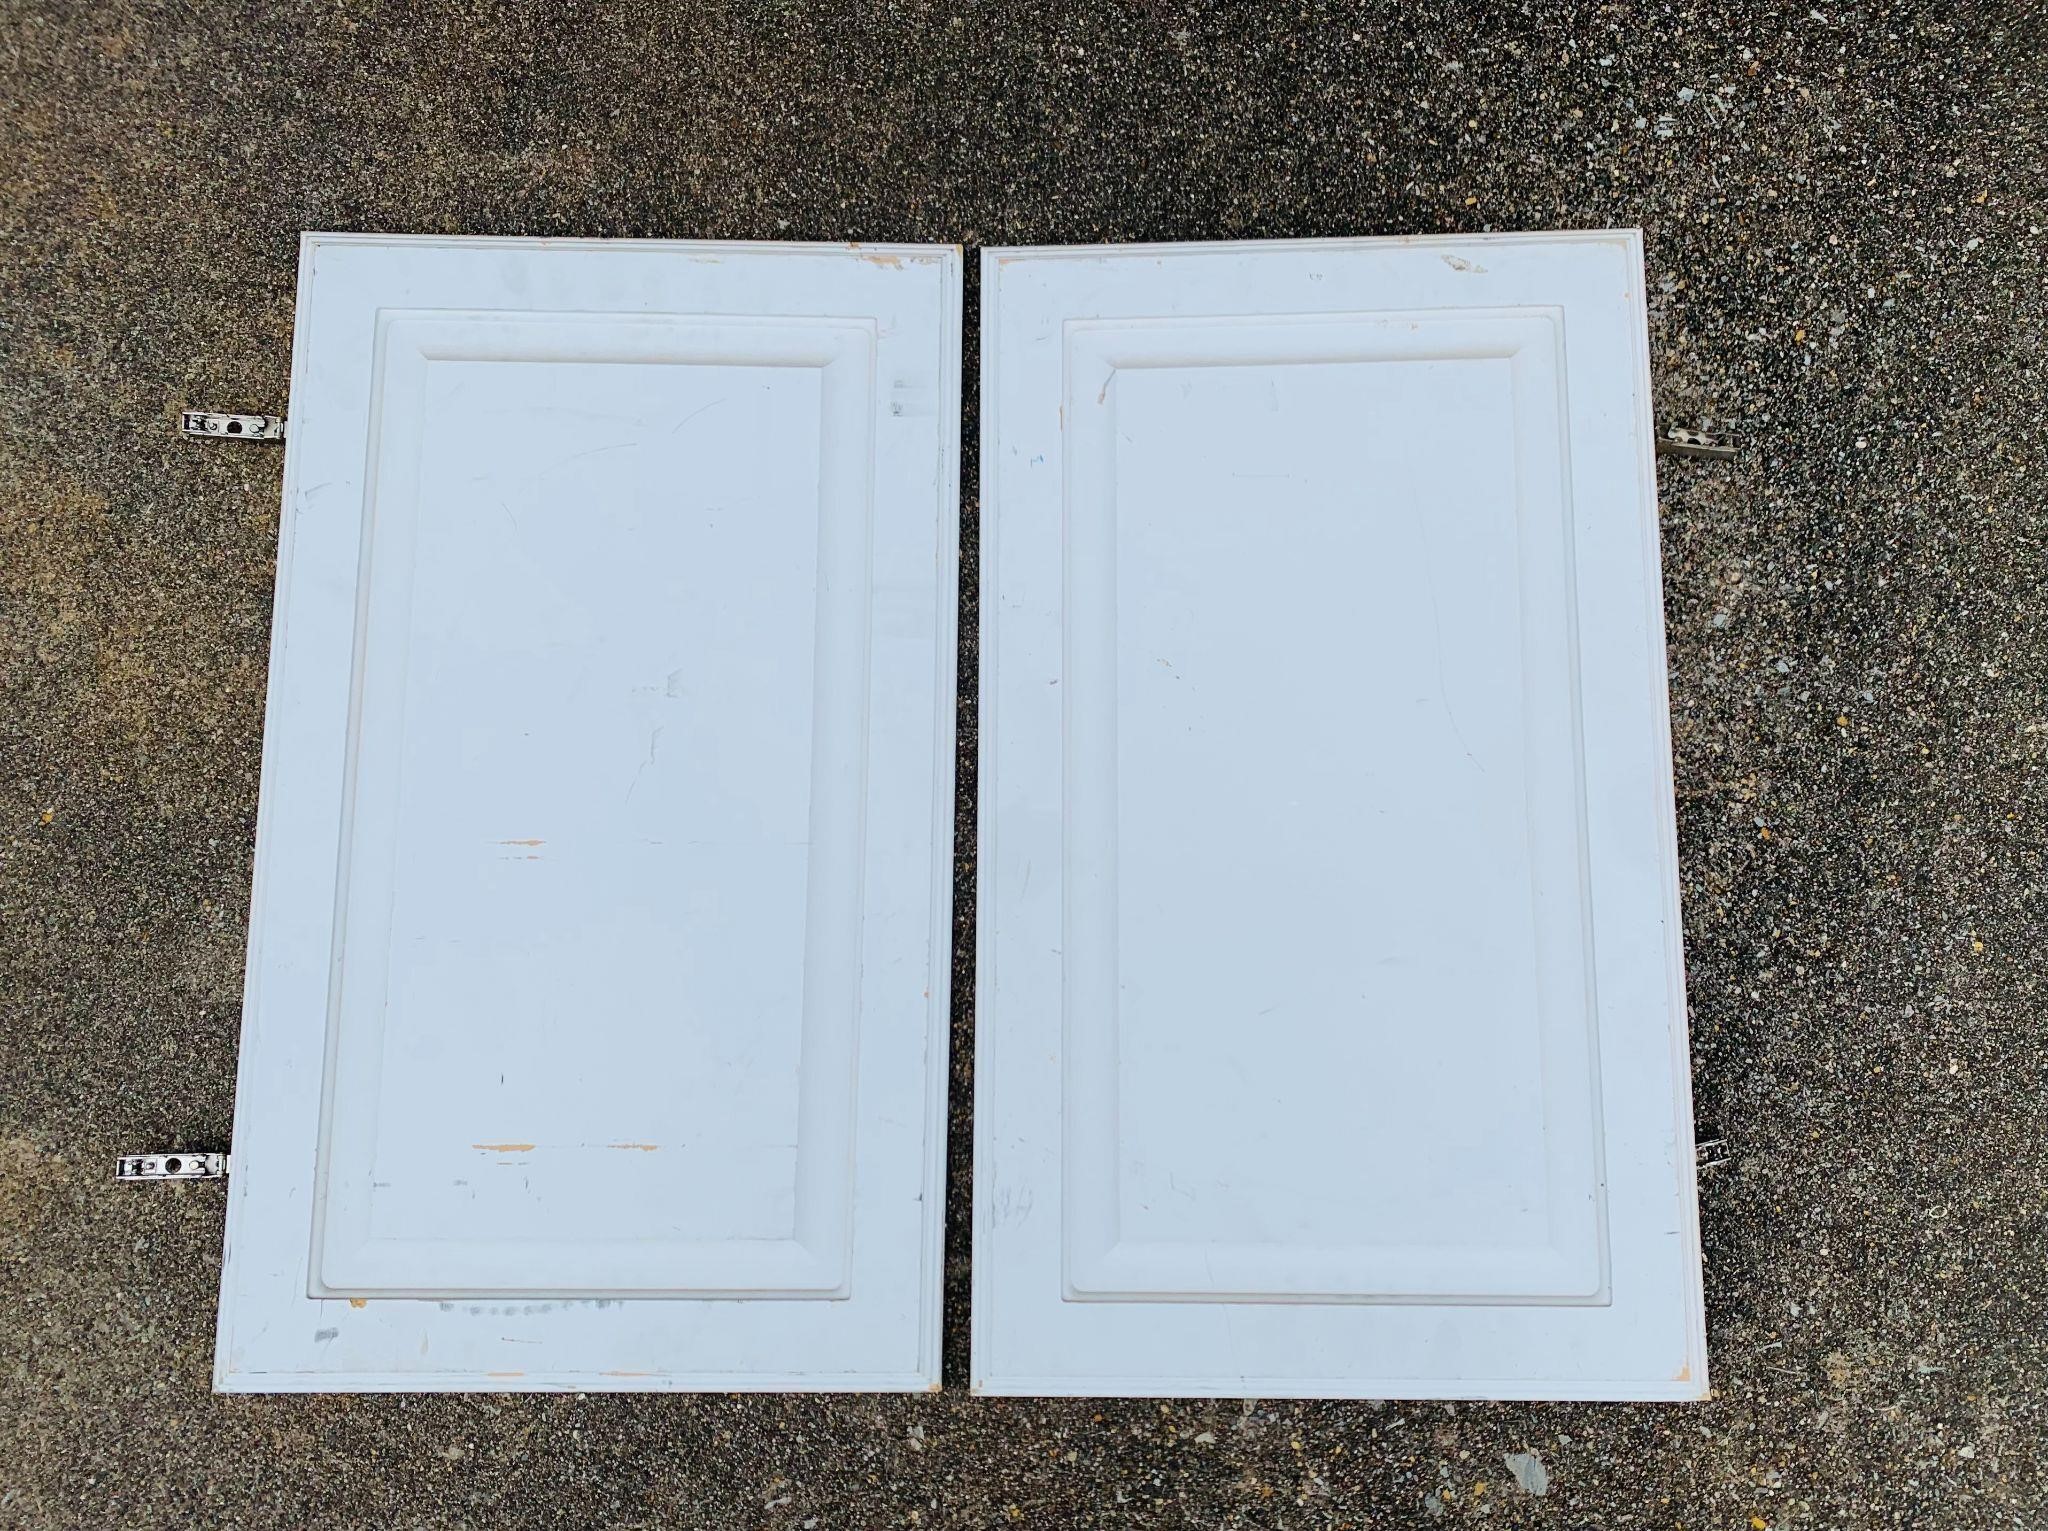 Cabinet Doors with Hinges